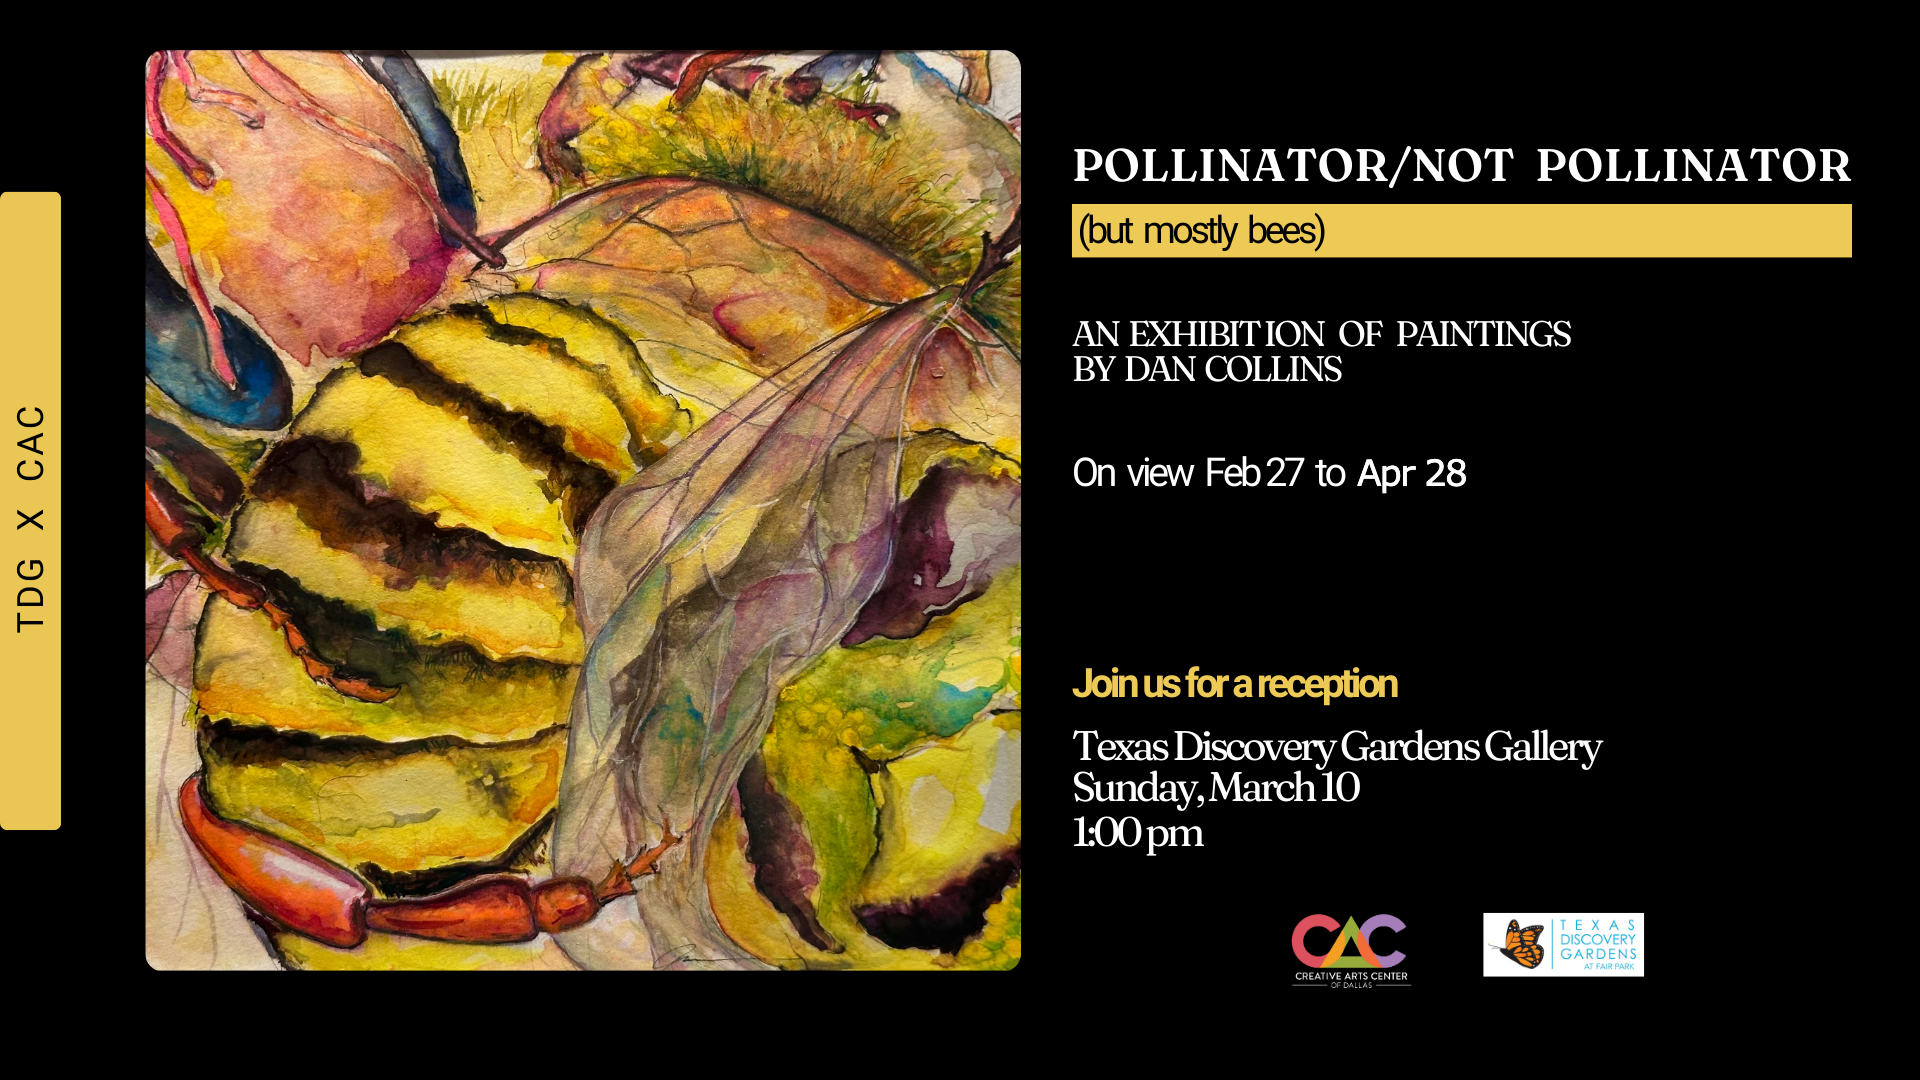 Image of a bee painting with exhibition dates listed